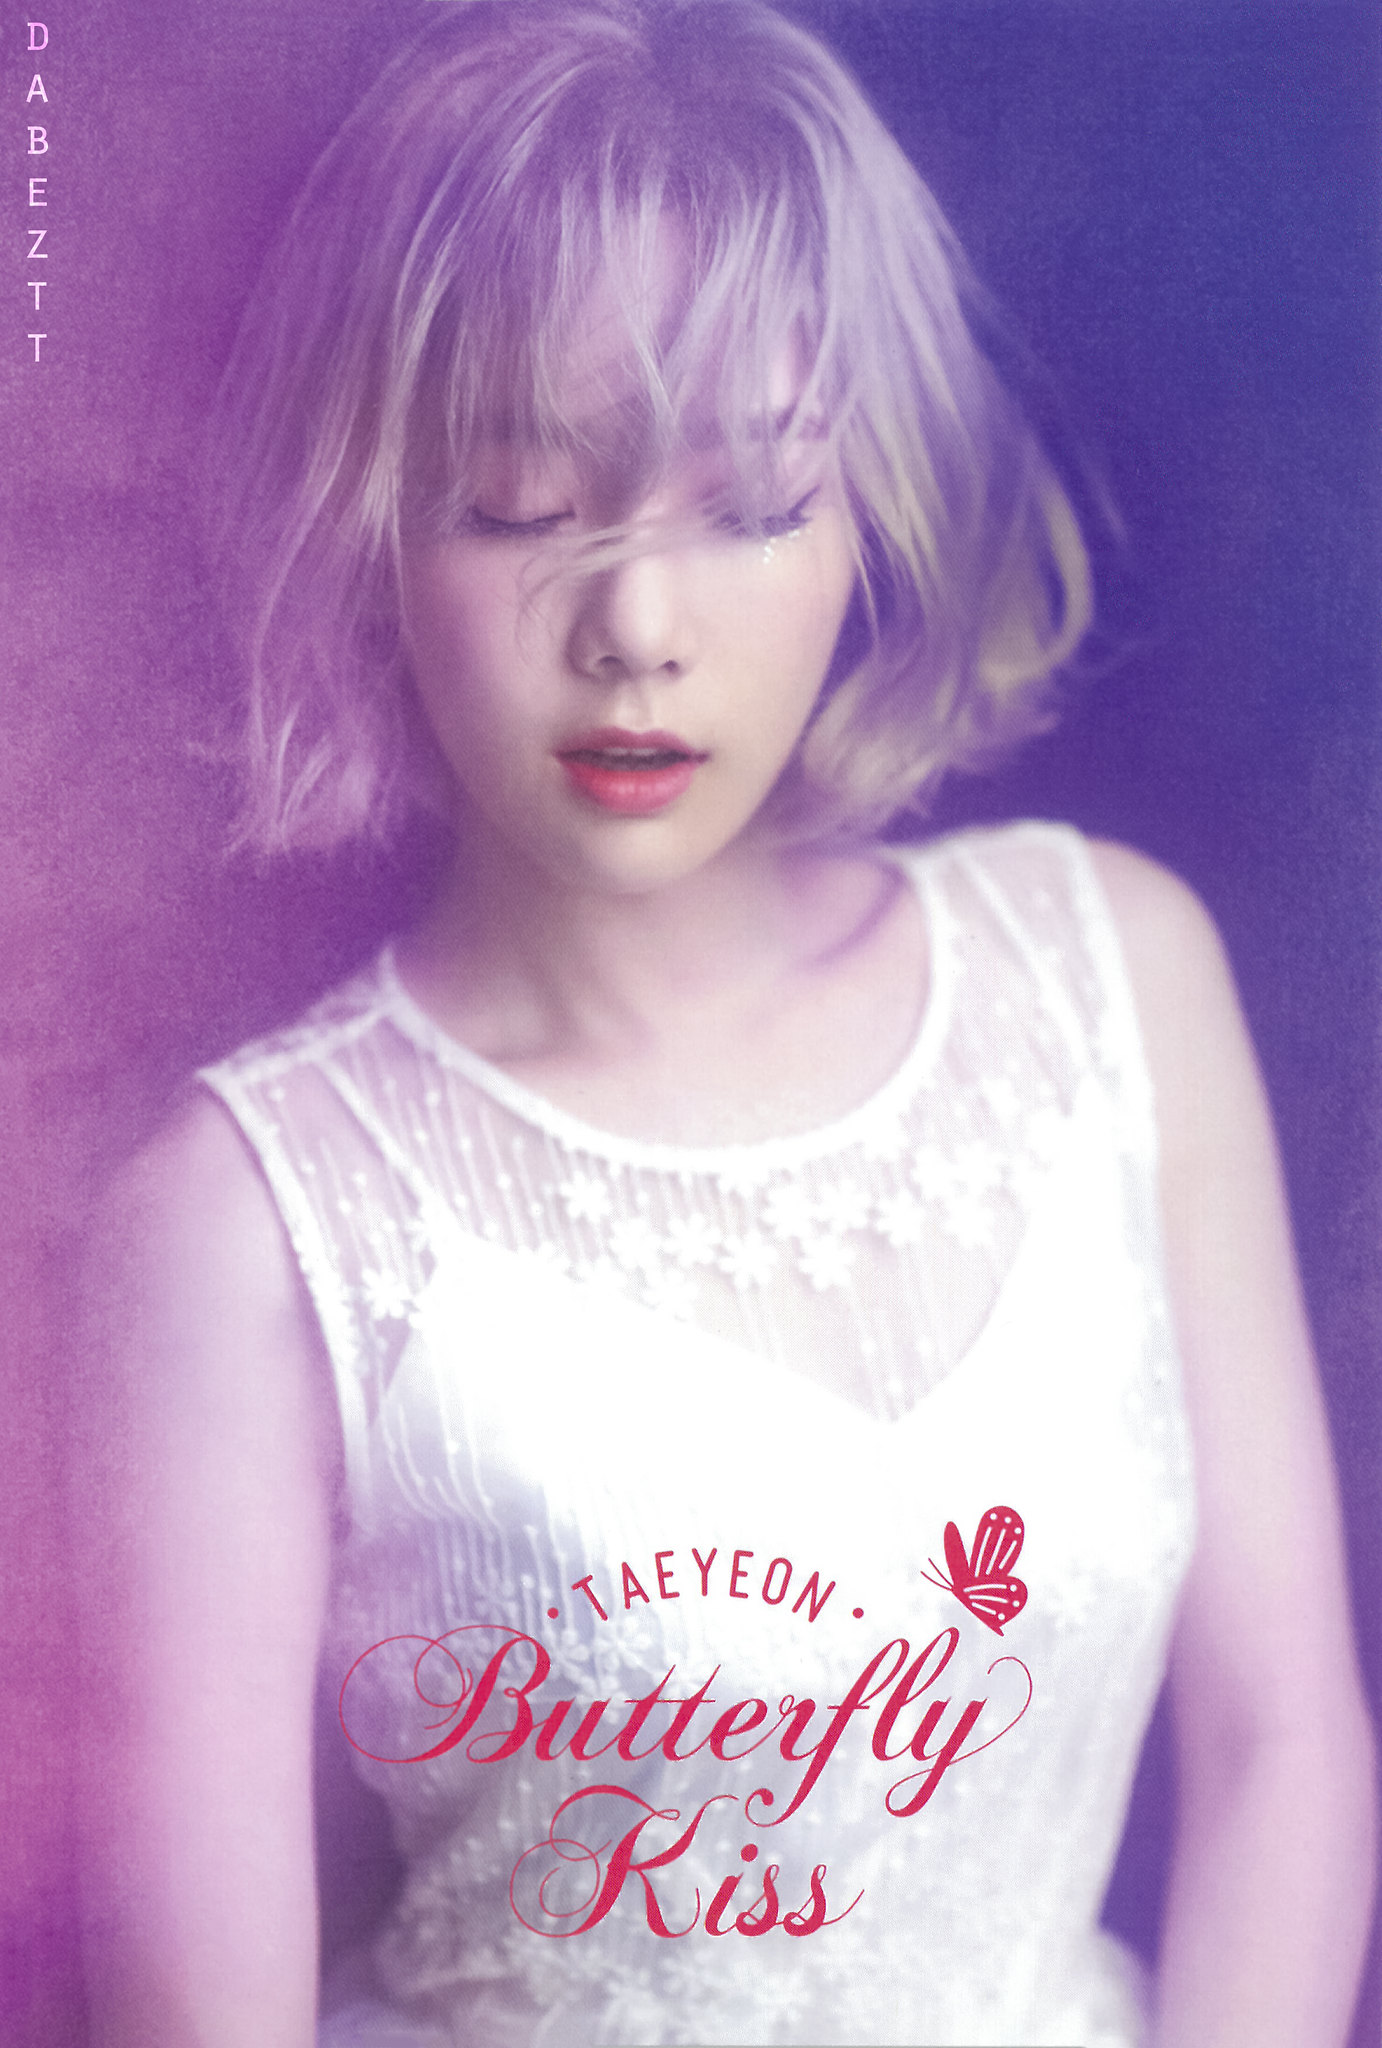 [PIC][24-05-2016]TaeYeon @ Solo Concert “Butterfly Kiss” 28275974895_1ed652333e_k